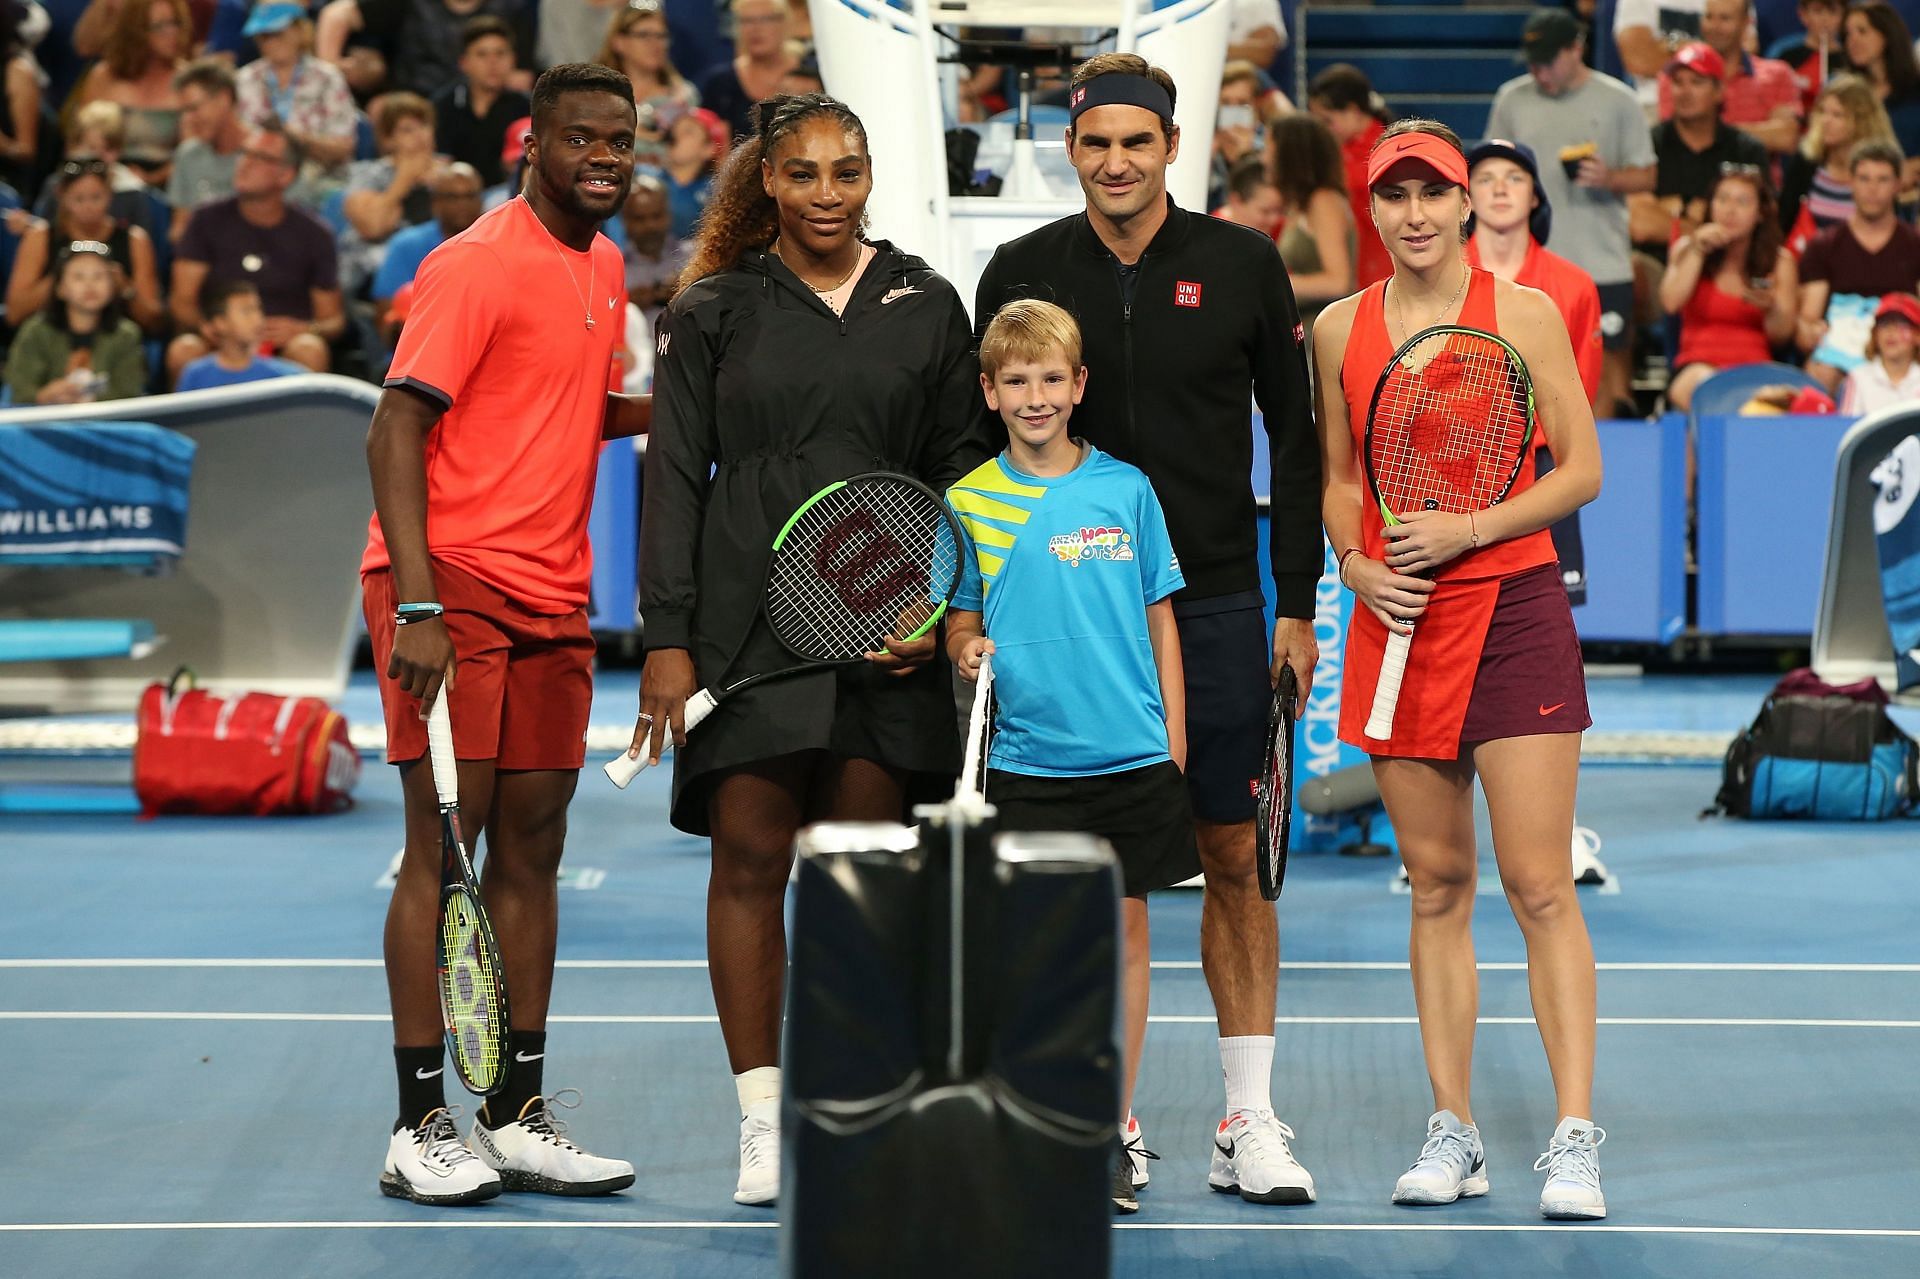 Frances Tiafoe and Serena Williams along with with Roger Federer and Belinda Bencic. (Pic - Getty Images)